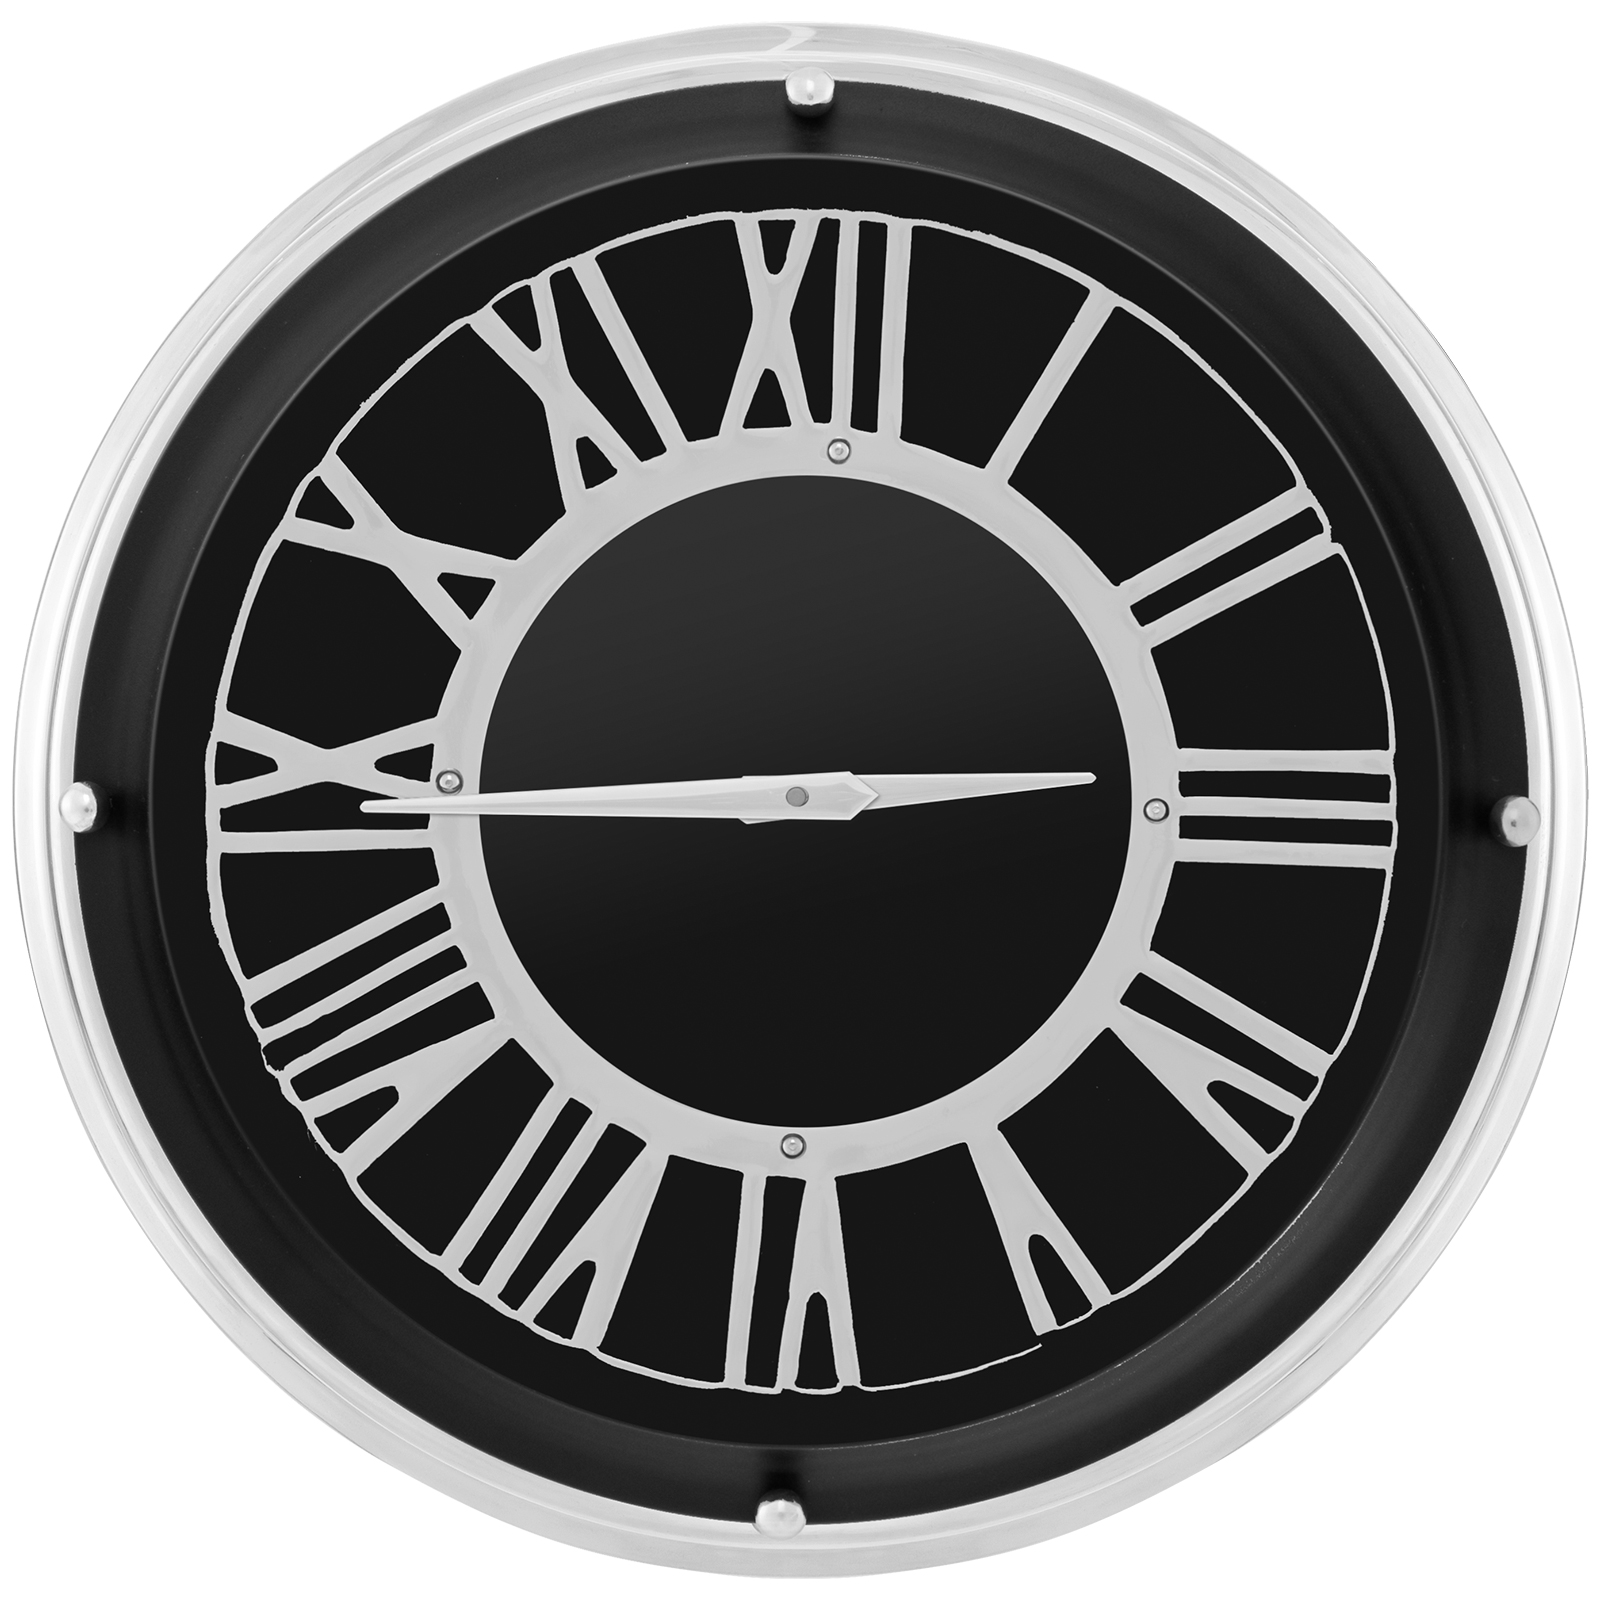 14/17.5 Inch Silent Wall Clock with Silver Frame-L